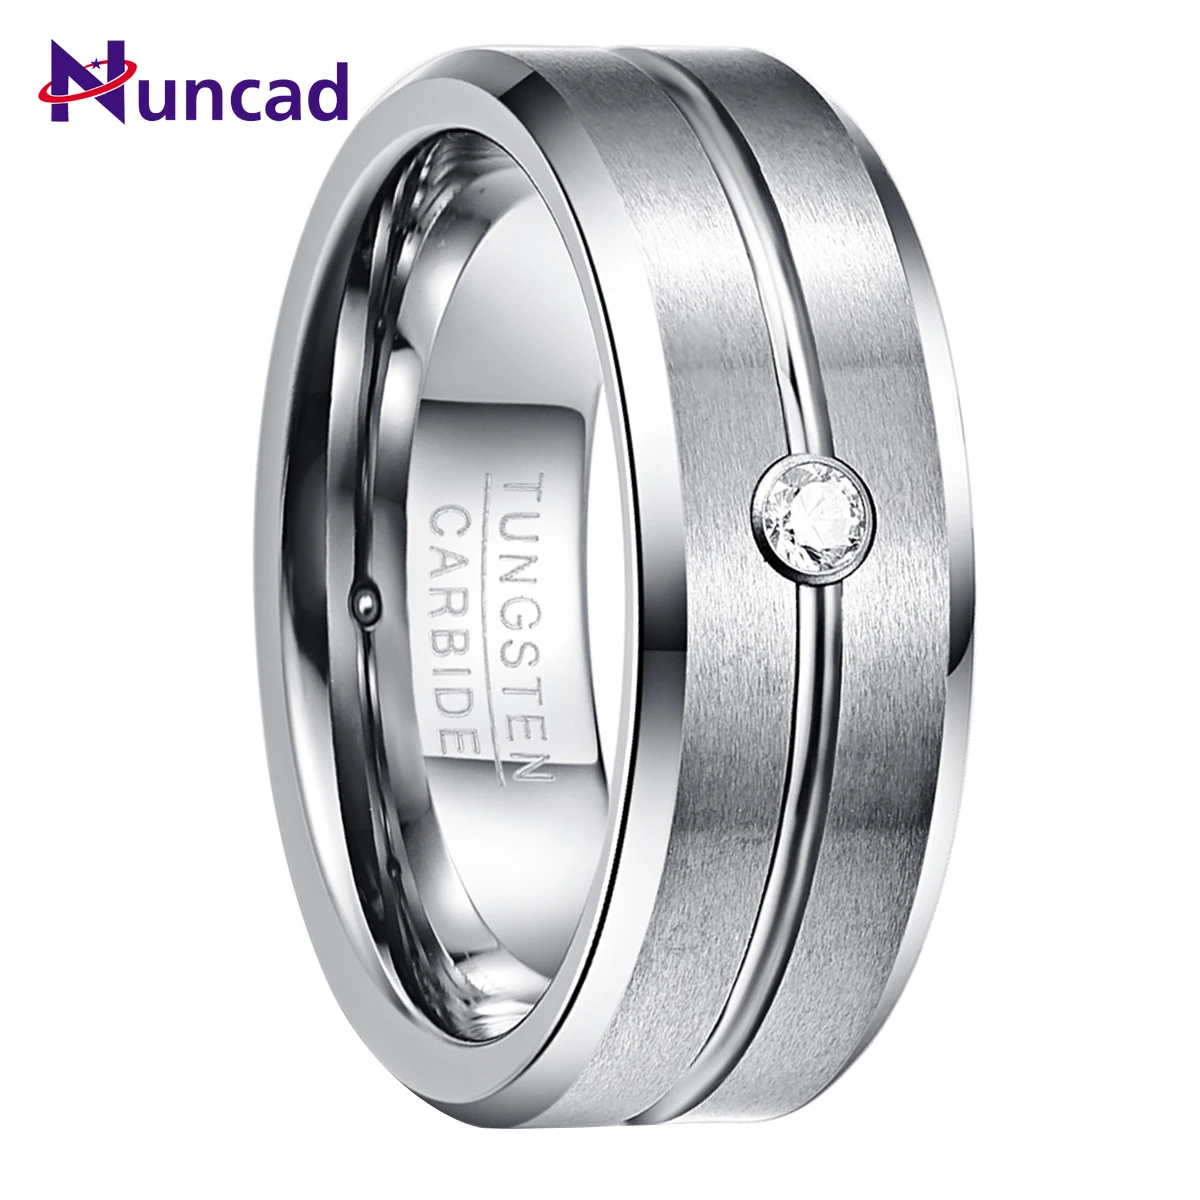 

Nuncad Men's 8mm Tungsten Carbide Rings Cubic Zirconia Grooved Tungsten Wedding Band Rings Matte Finish Polished Beveled Edge